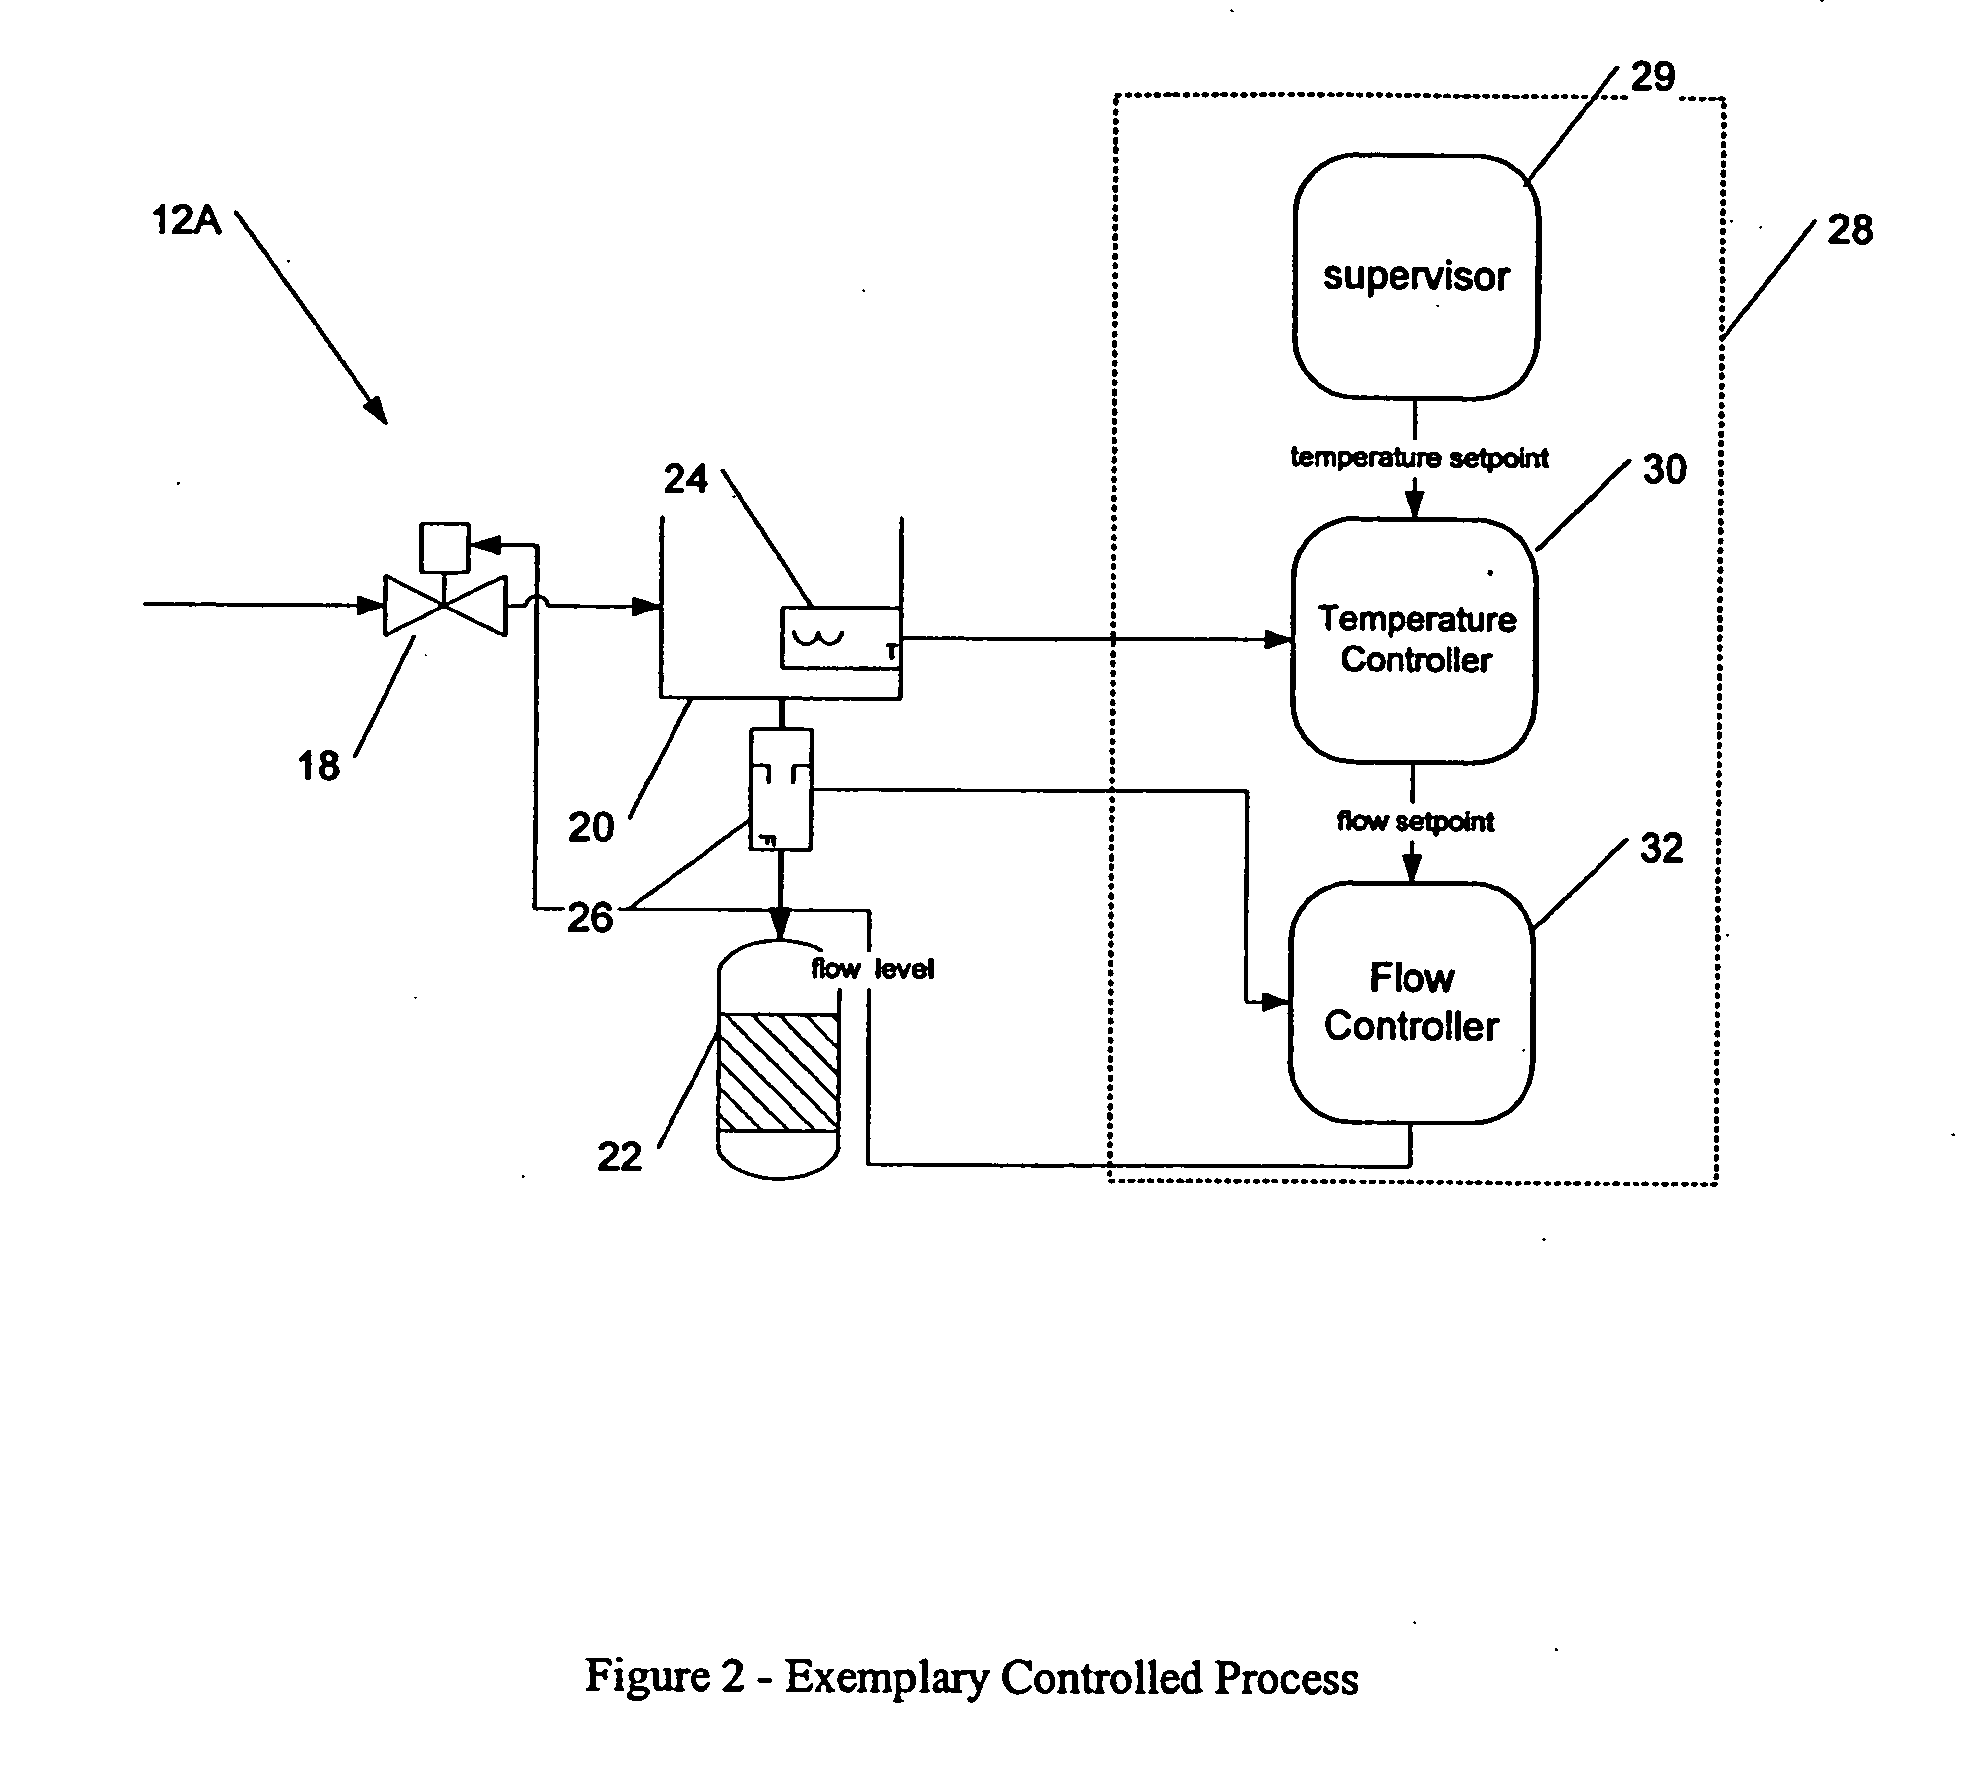 Methods and apparatus for control configuration using live data